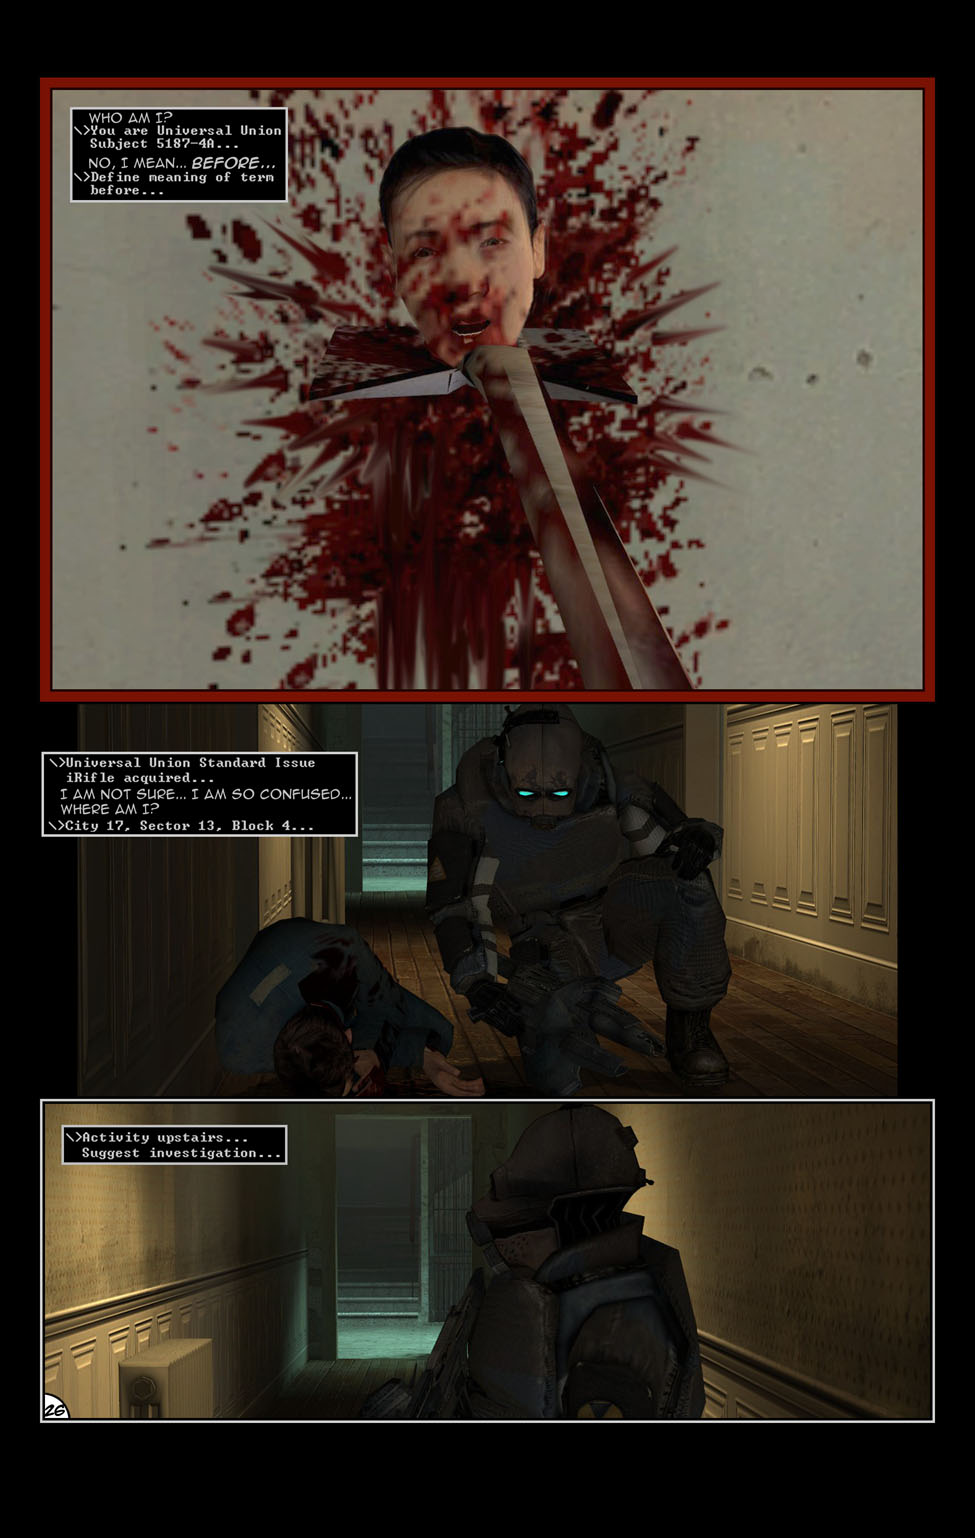 The citizen's decapitated head is horrifically being held against the wall by the shovel, which is jammed into the wall. Meanwhile, the soldier picks its own rifle back up from the unconscious Mikael as they wonder who they were before all this. The AI then suggests they investigate upstairs.